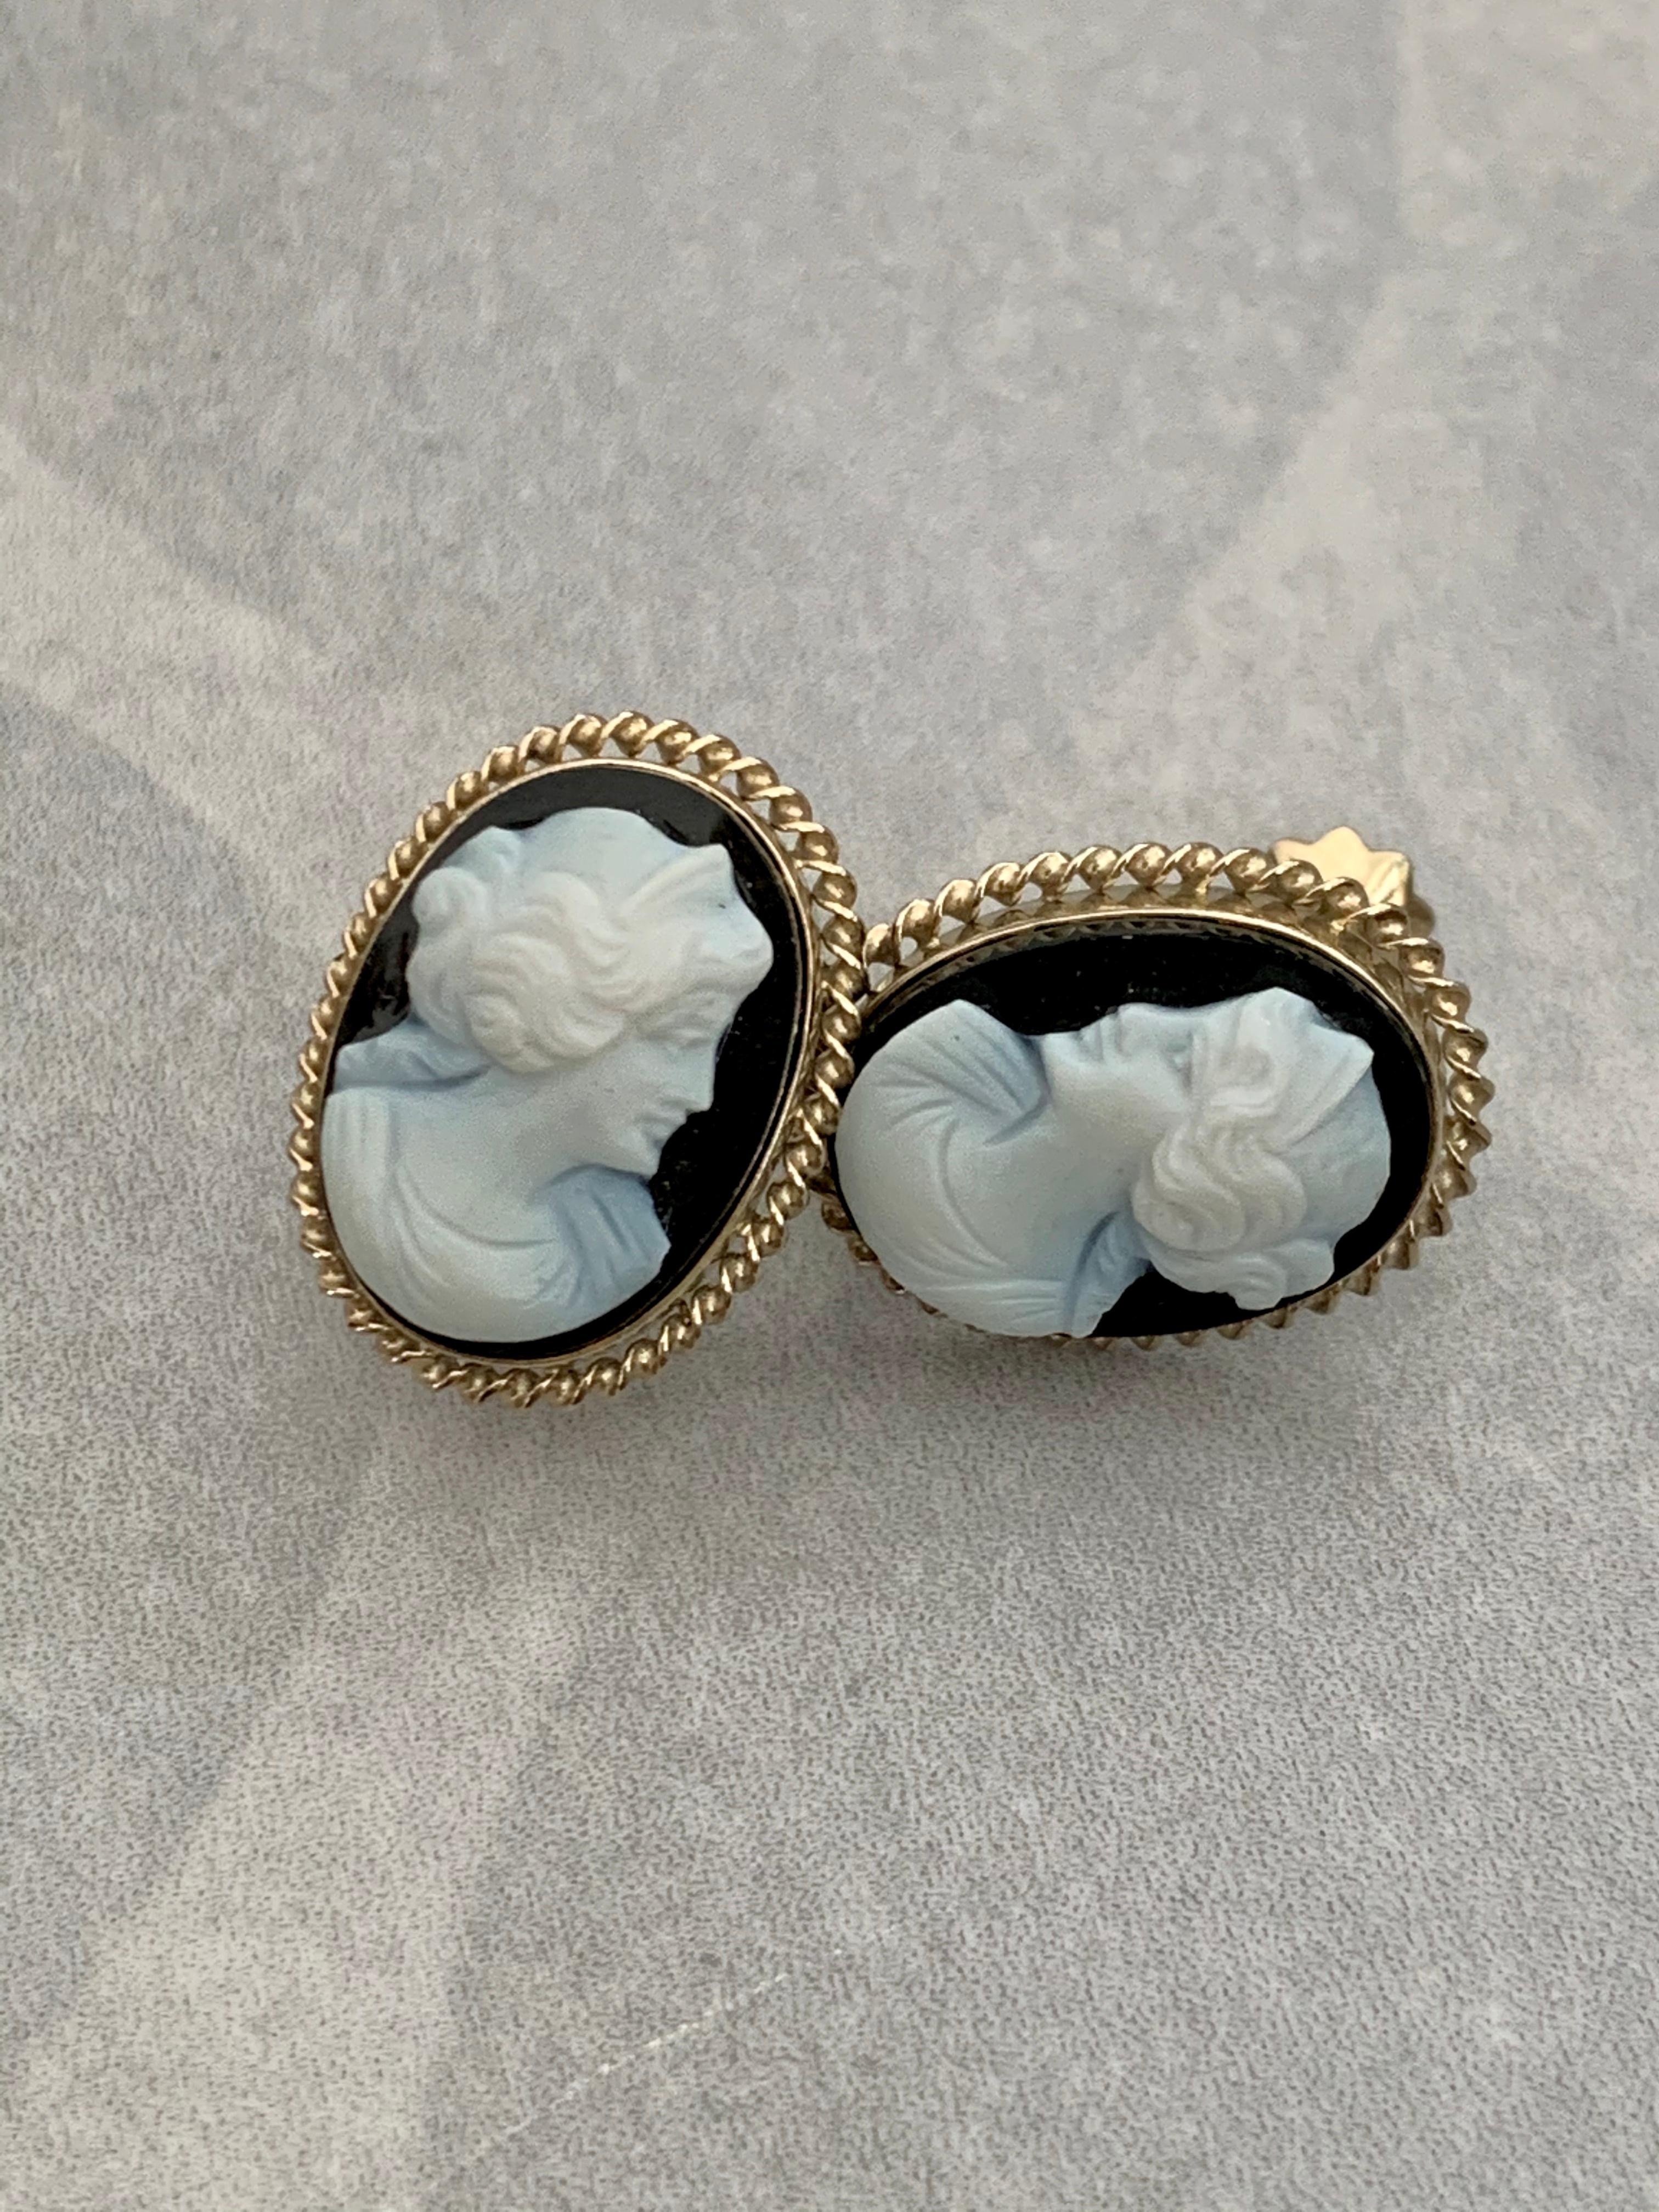 Vintage Hardstone Cameo 14 Karat Yellow Gold Screw Back Earrings In Good Condition For Sale In St. Louis Park, MN